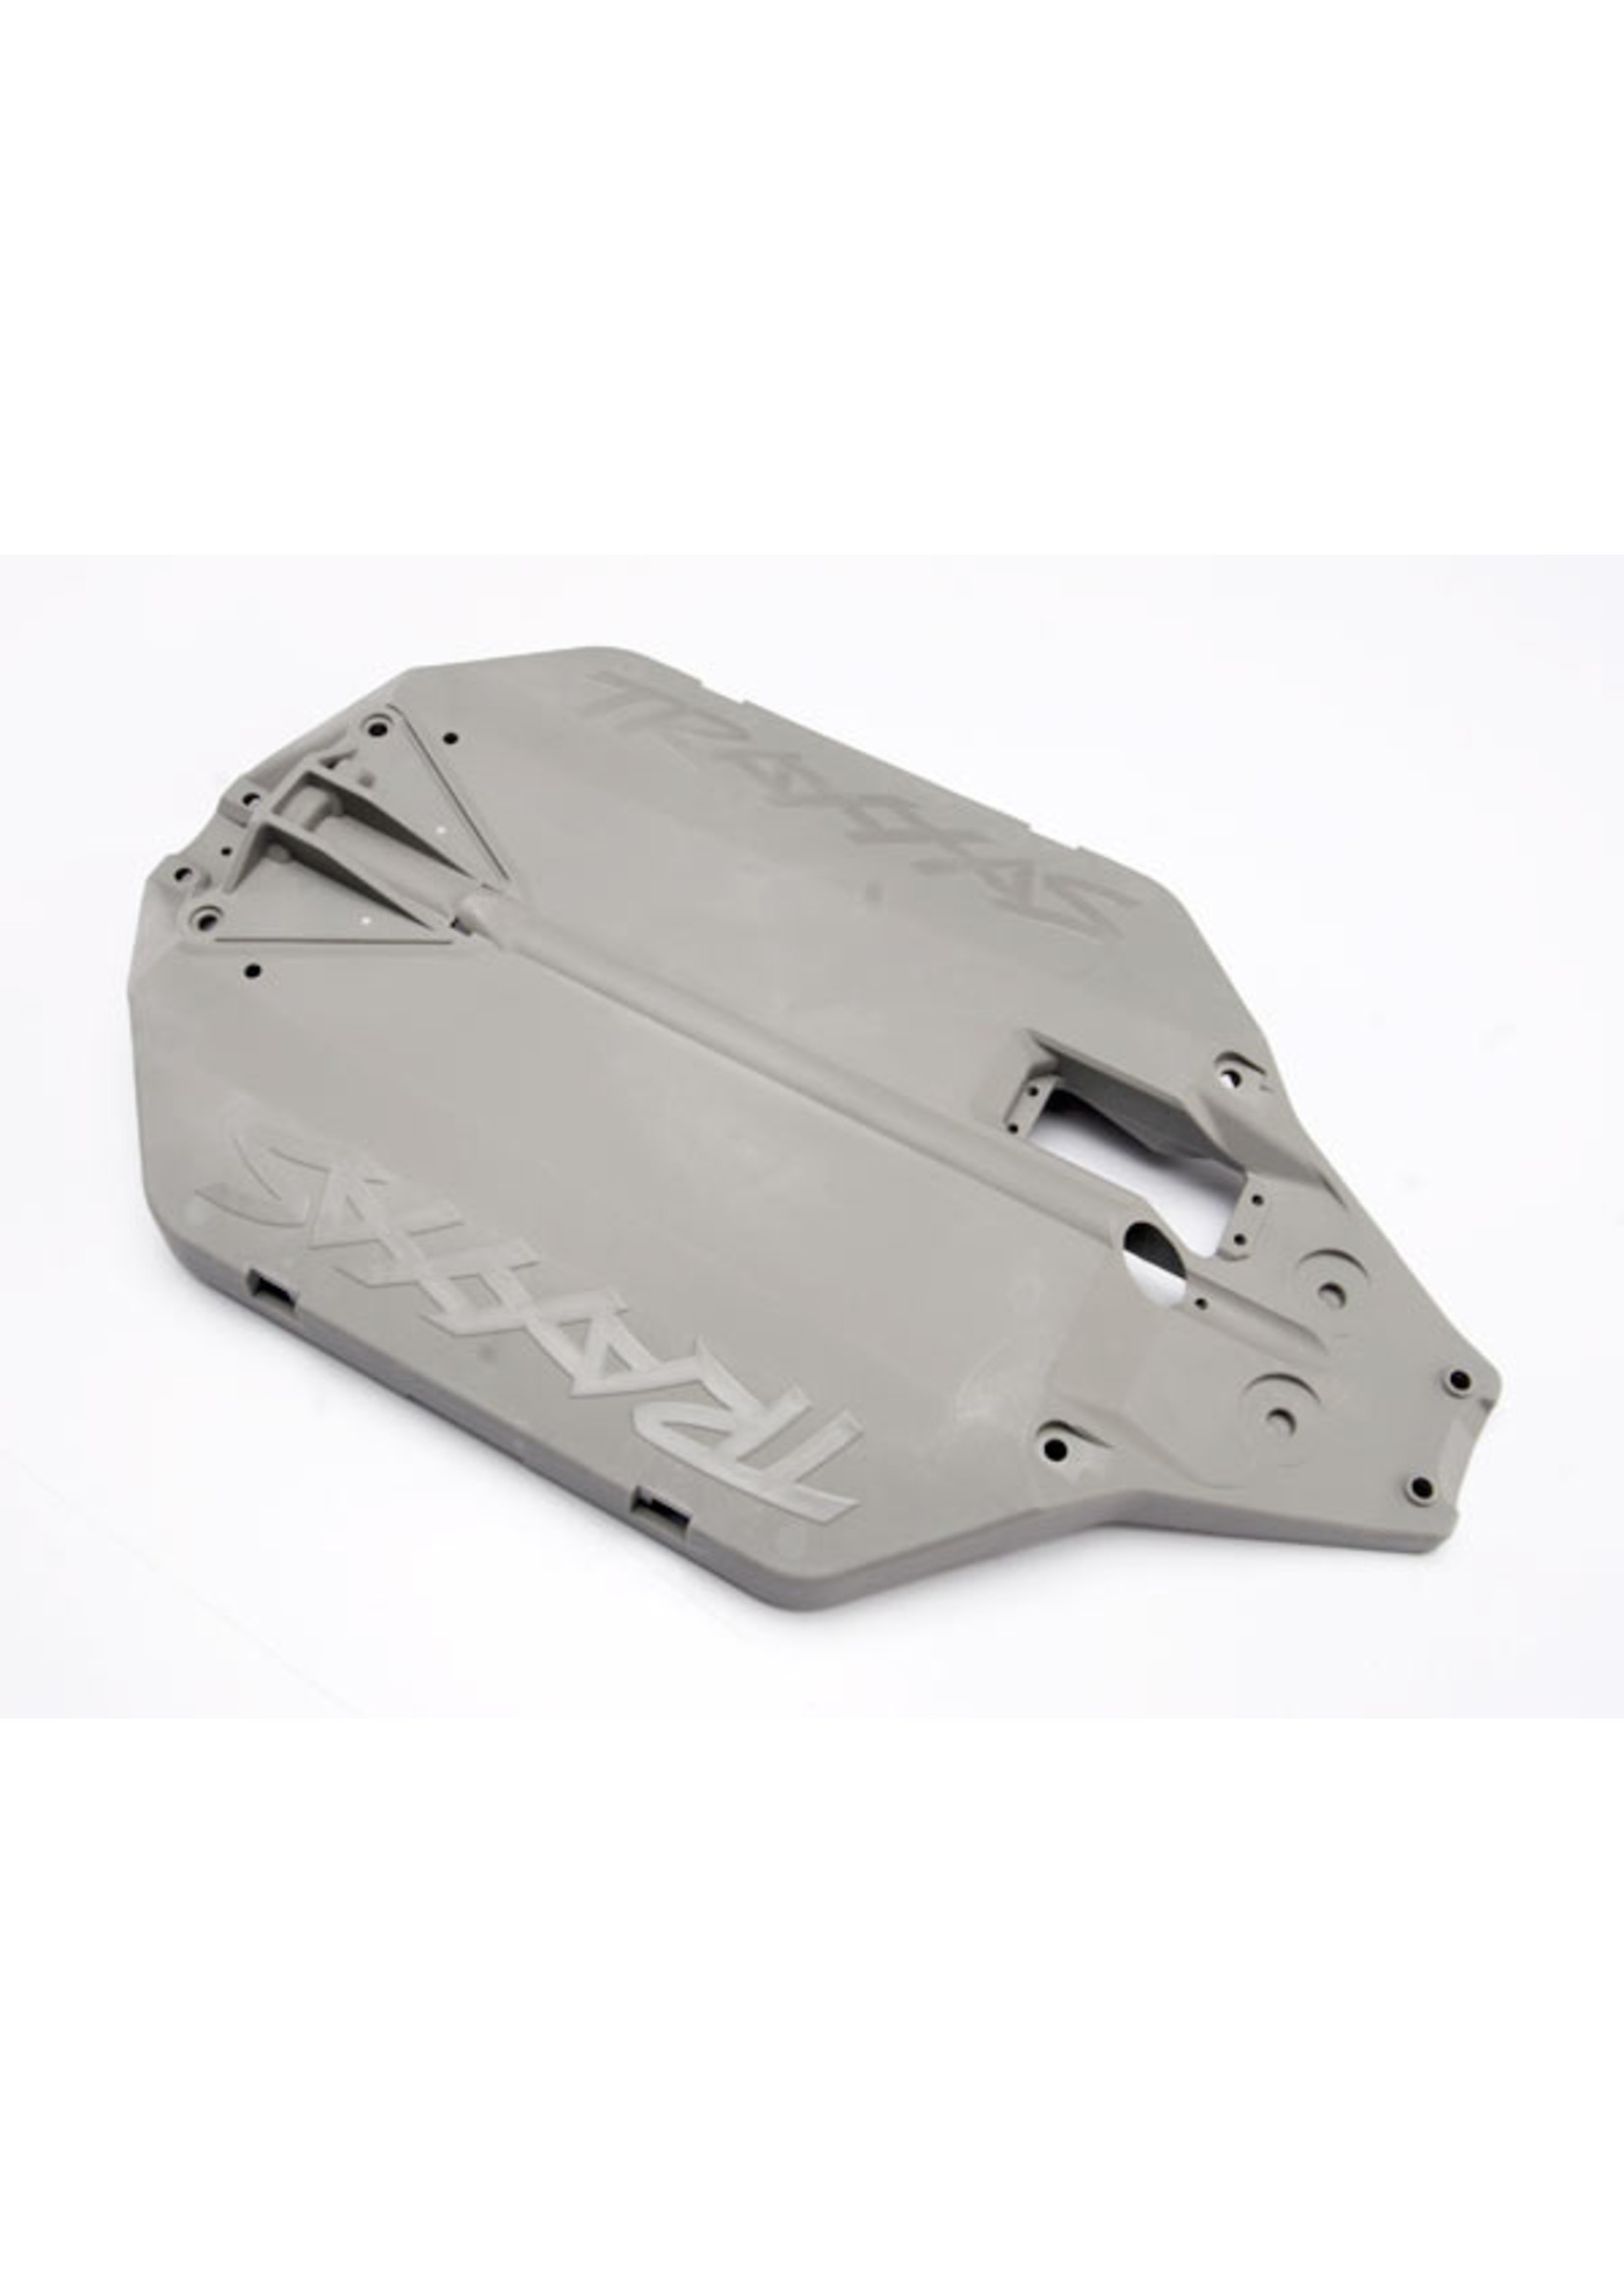 Traxxas 6822 - Chassis for Slash 4x4